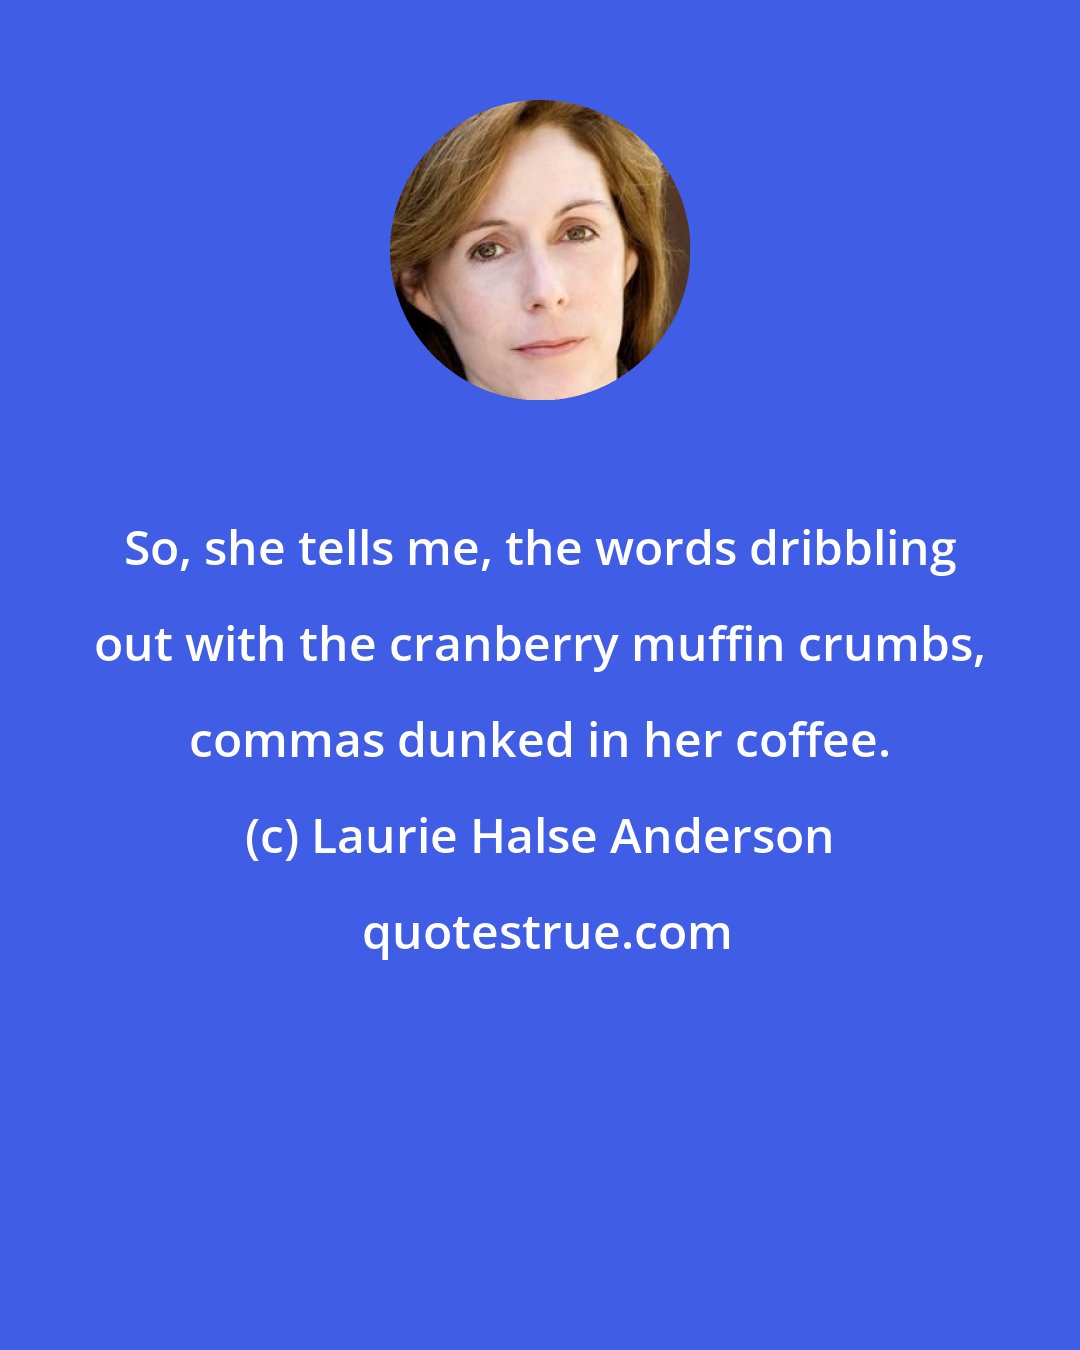 Laurie Halse Anderson: So, she tells me, the words dribbling out with the cranberry muffin crumbs, commas dunked in her coffee.